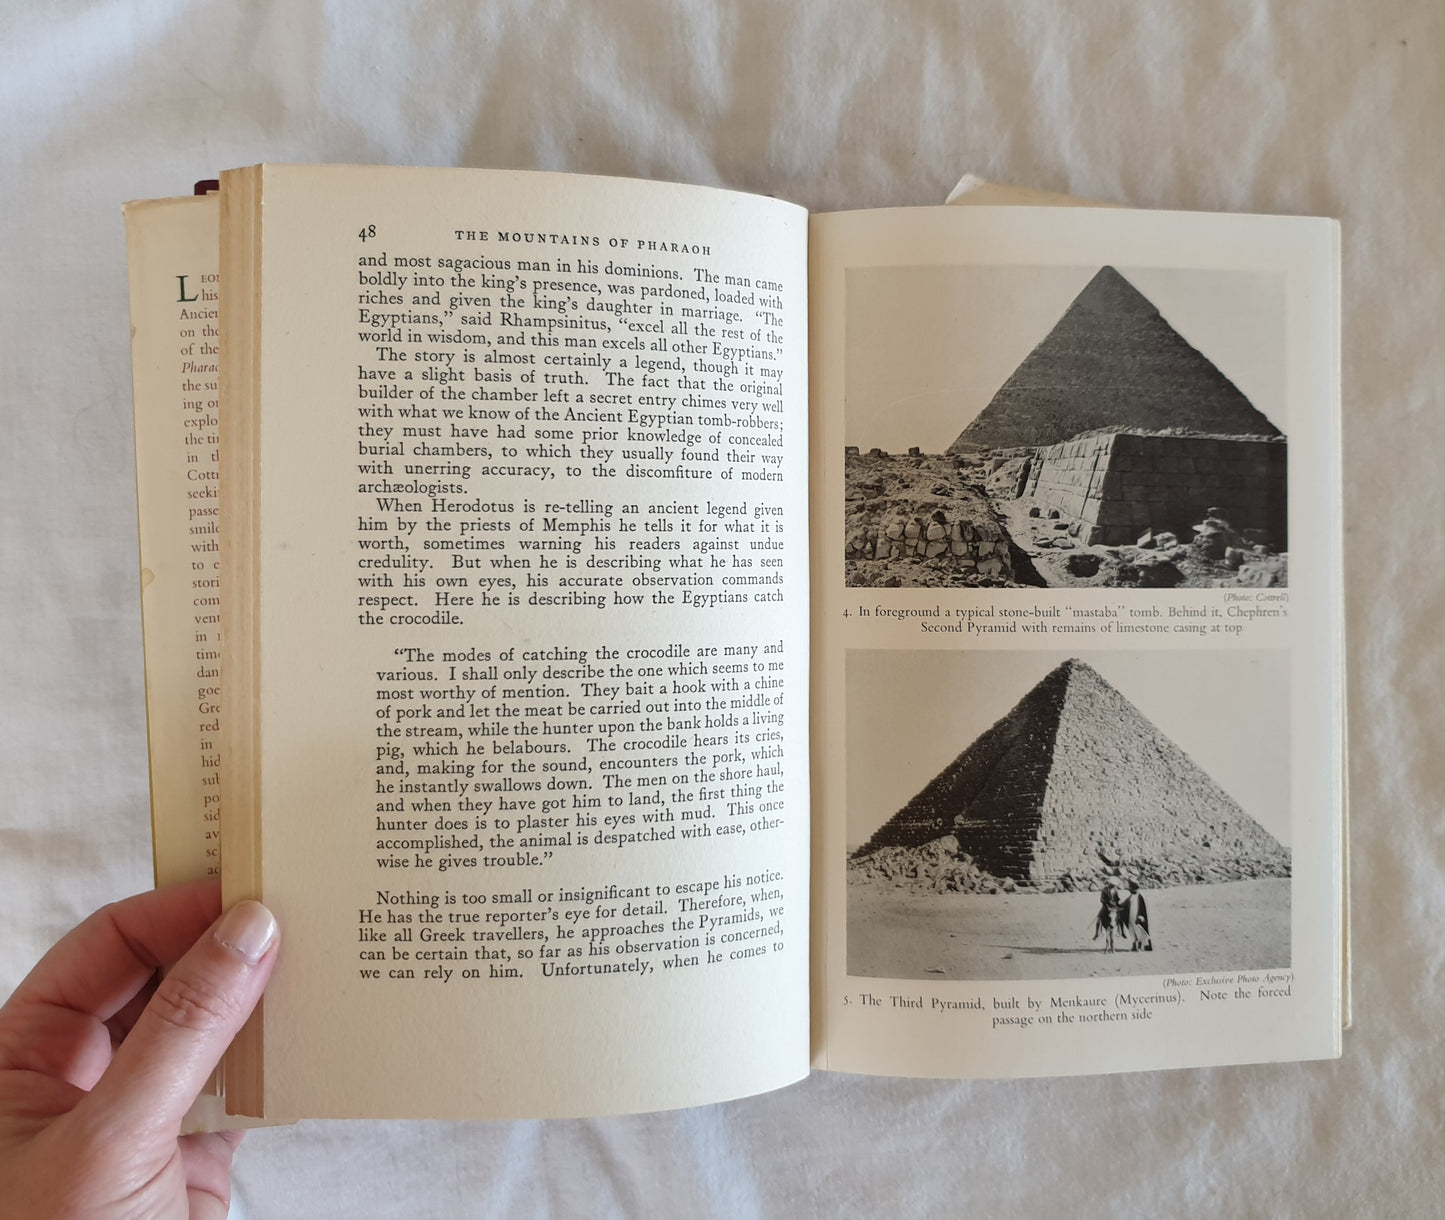 The Mountains of Pharaoh by Leonard Cottrell